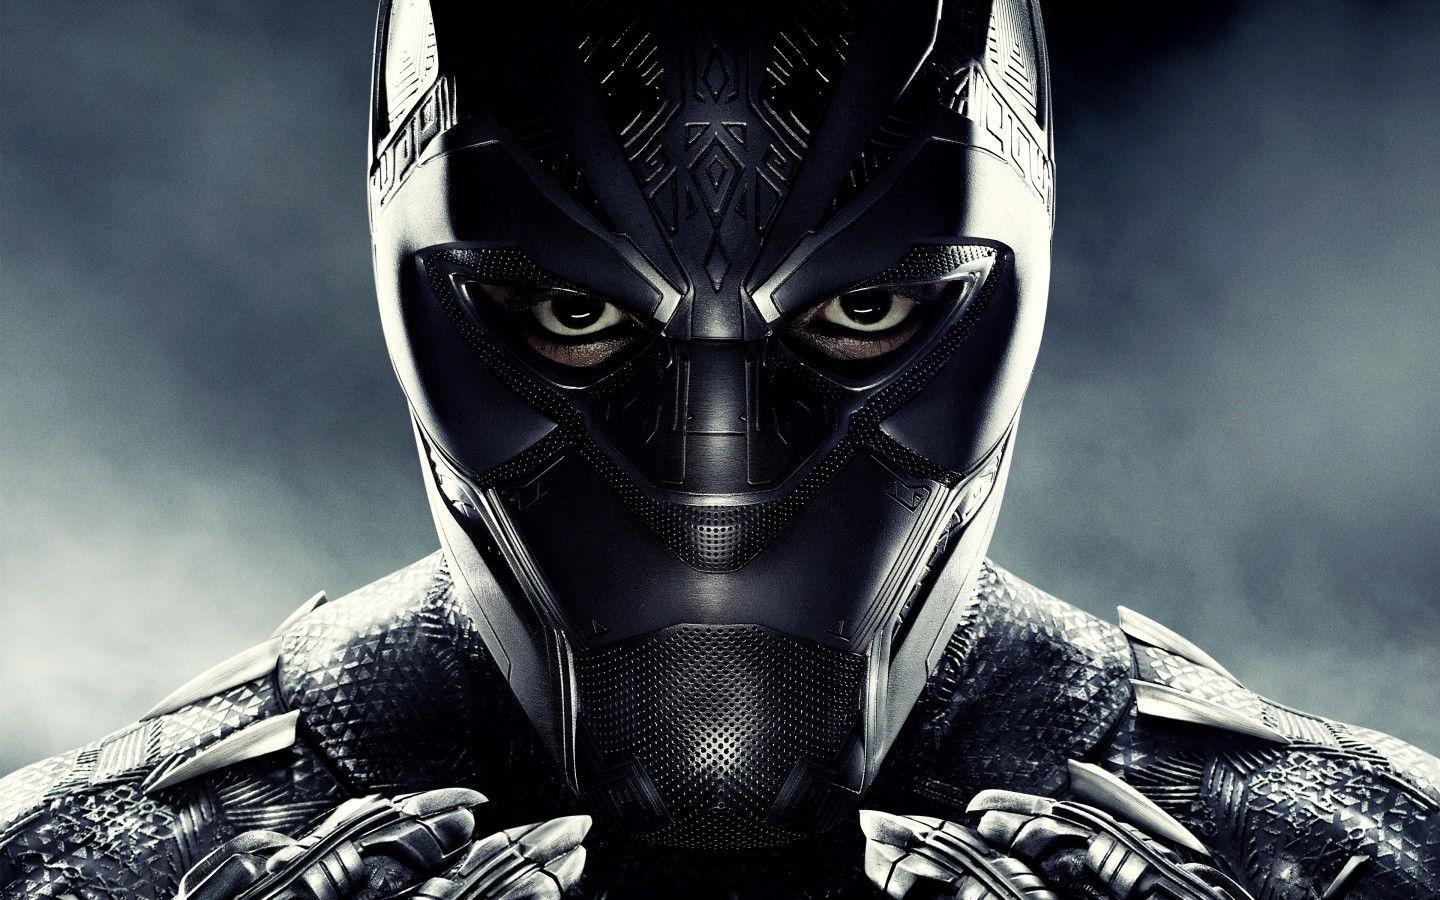 Download 1440x900 Black Panther, Suit, Mask Wallpaper for MacBook